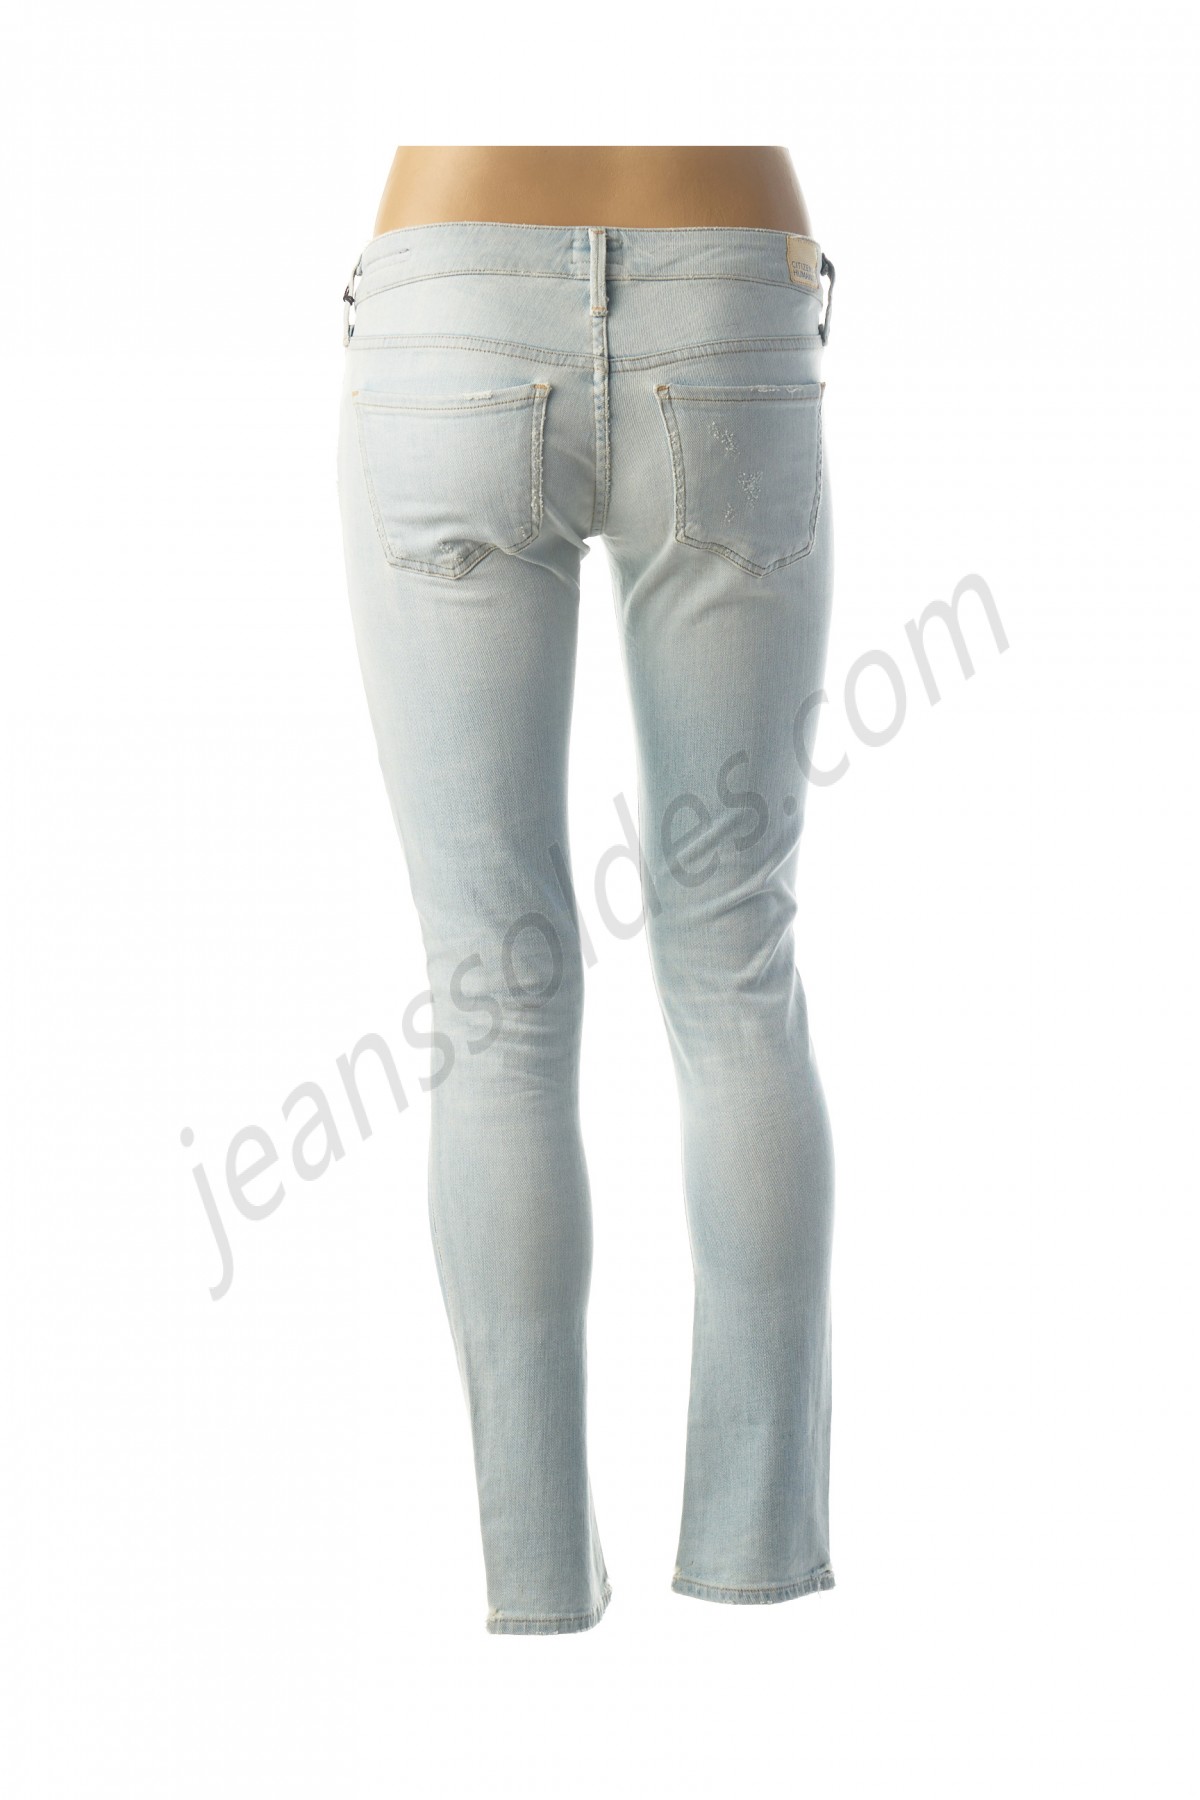 citizens of humanity-Jeans coupe slim prix d’amis - -1